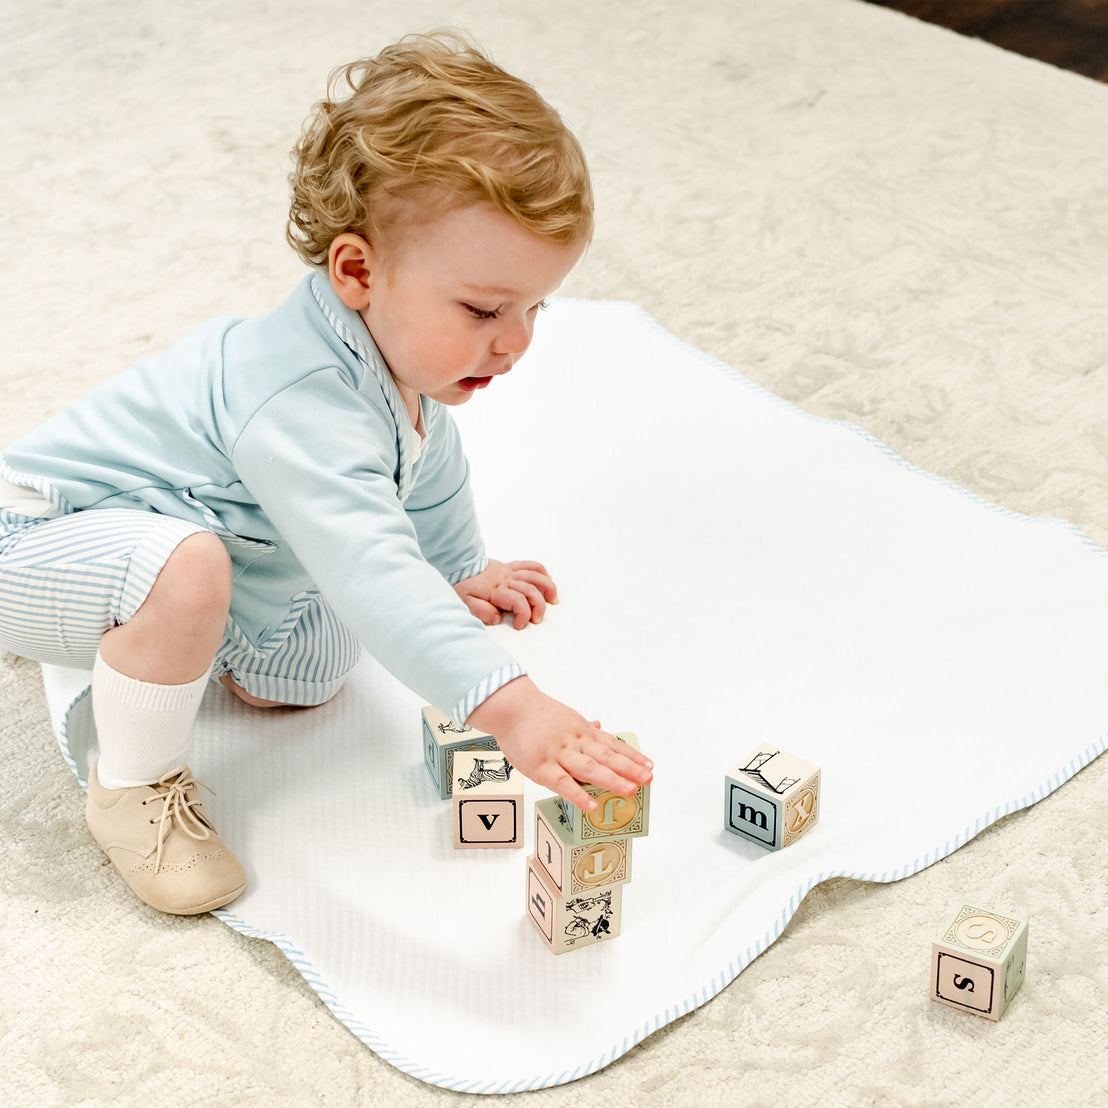 Baby boy playing on a Theodore Personalized Blanket.